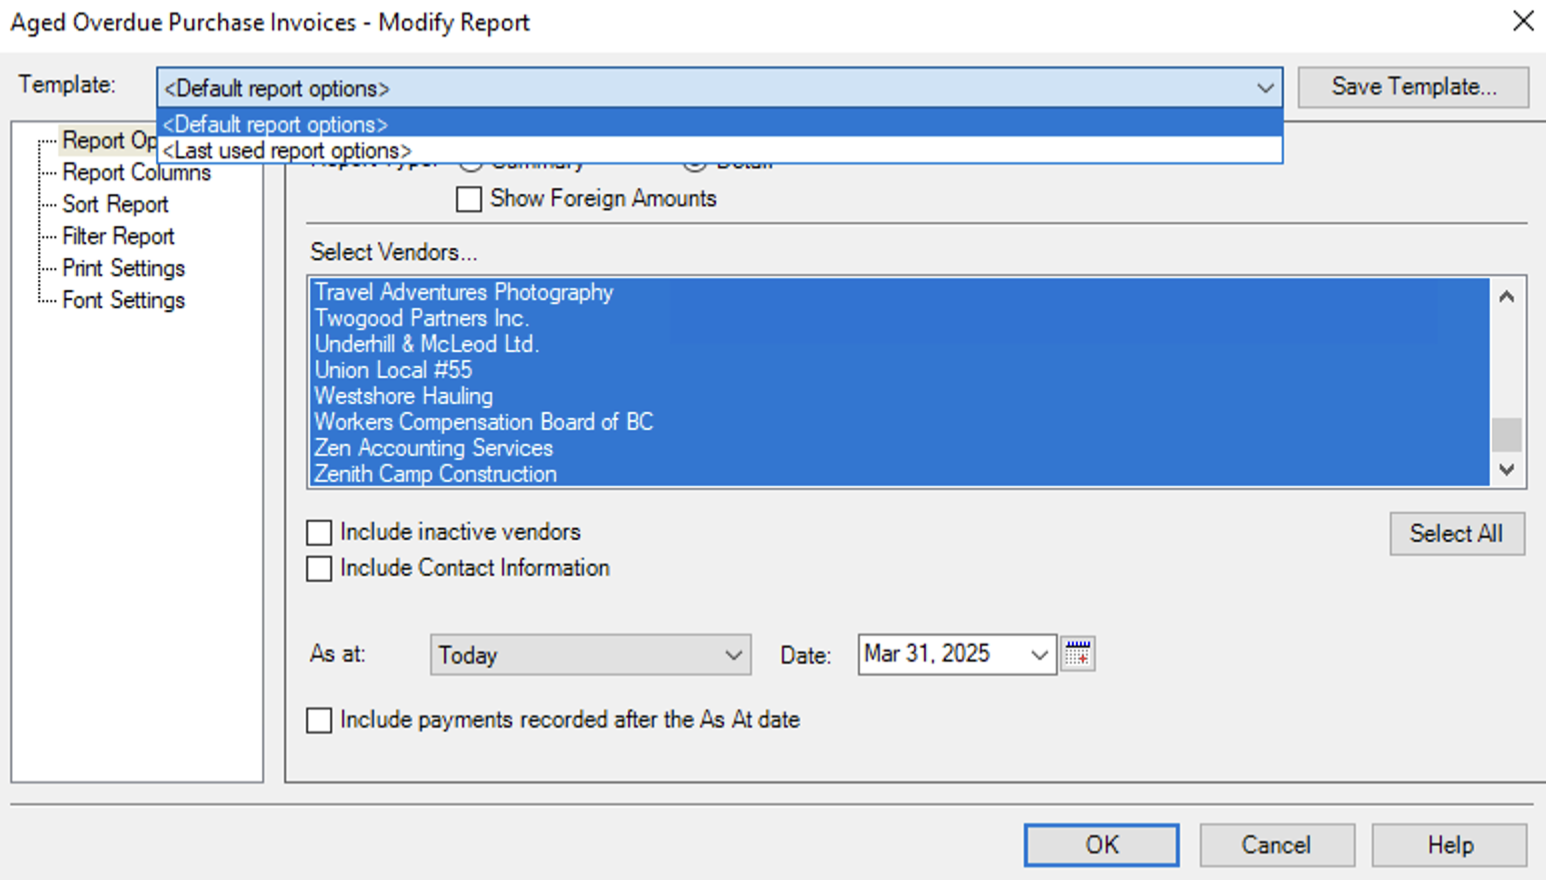 Modifying the Aged Overdue Purchase Invoices Report.